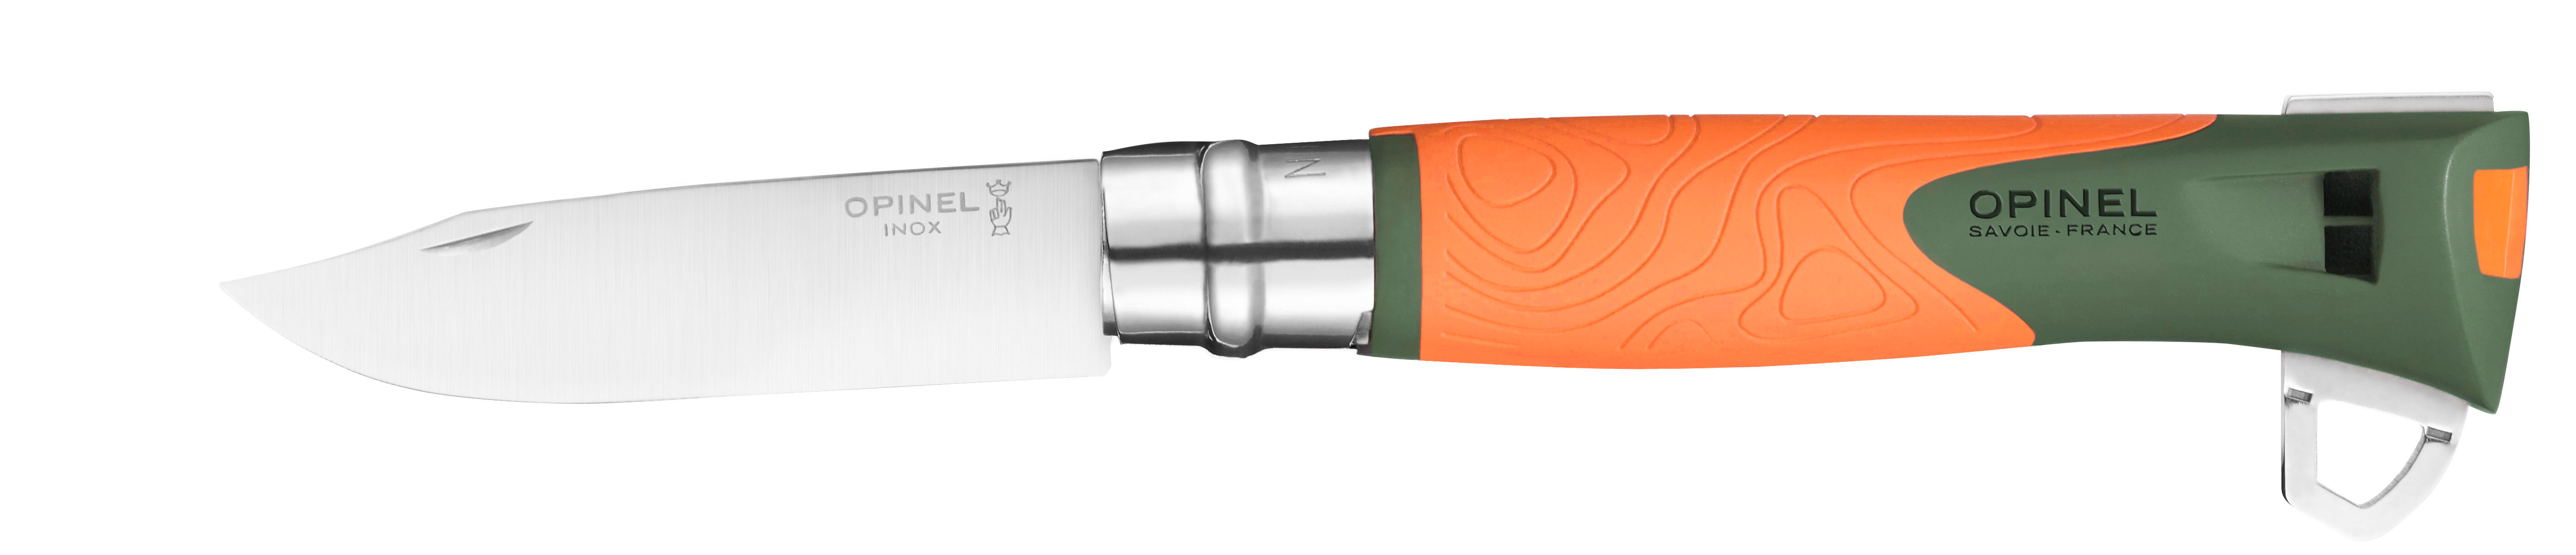 Opinel N°12 Explore Tire Tique - Knife